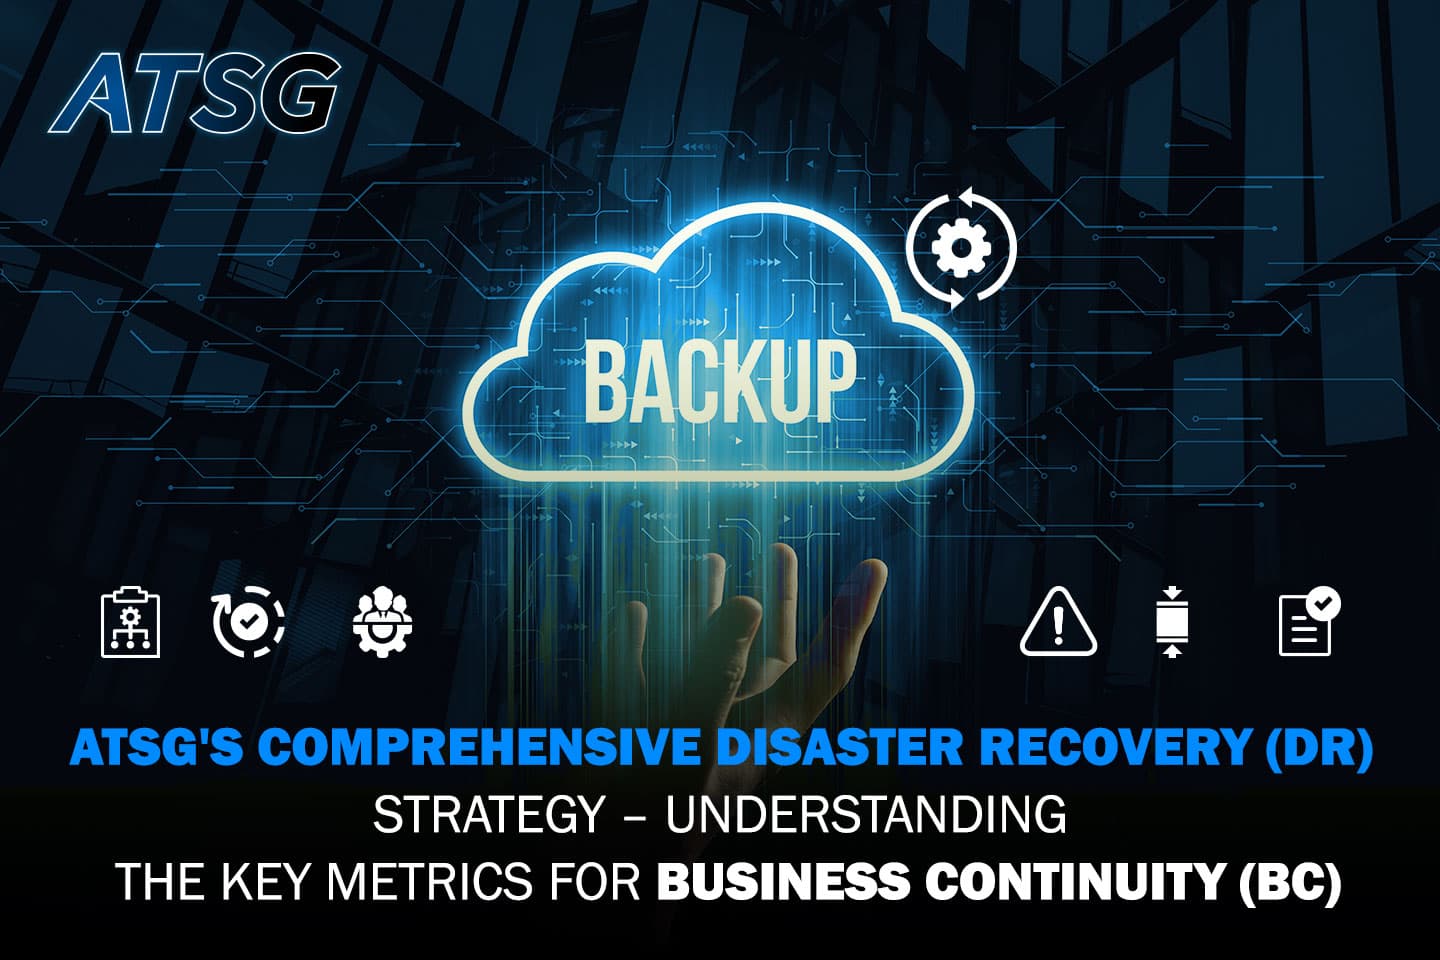 ATSG's Comprehensive Disaster Recovery Strategy – Understanding the Key Metrics for Business Continuity